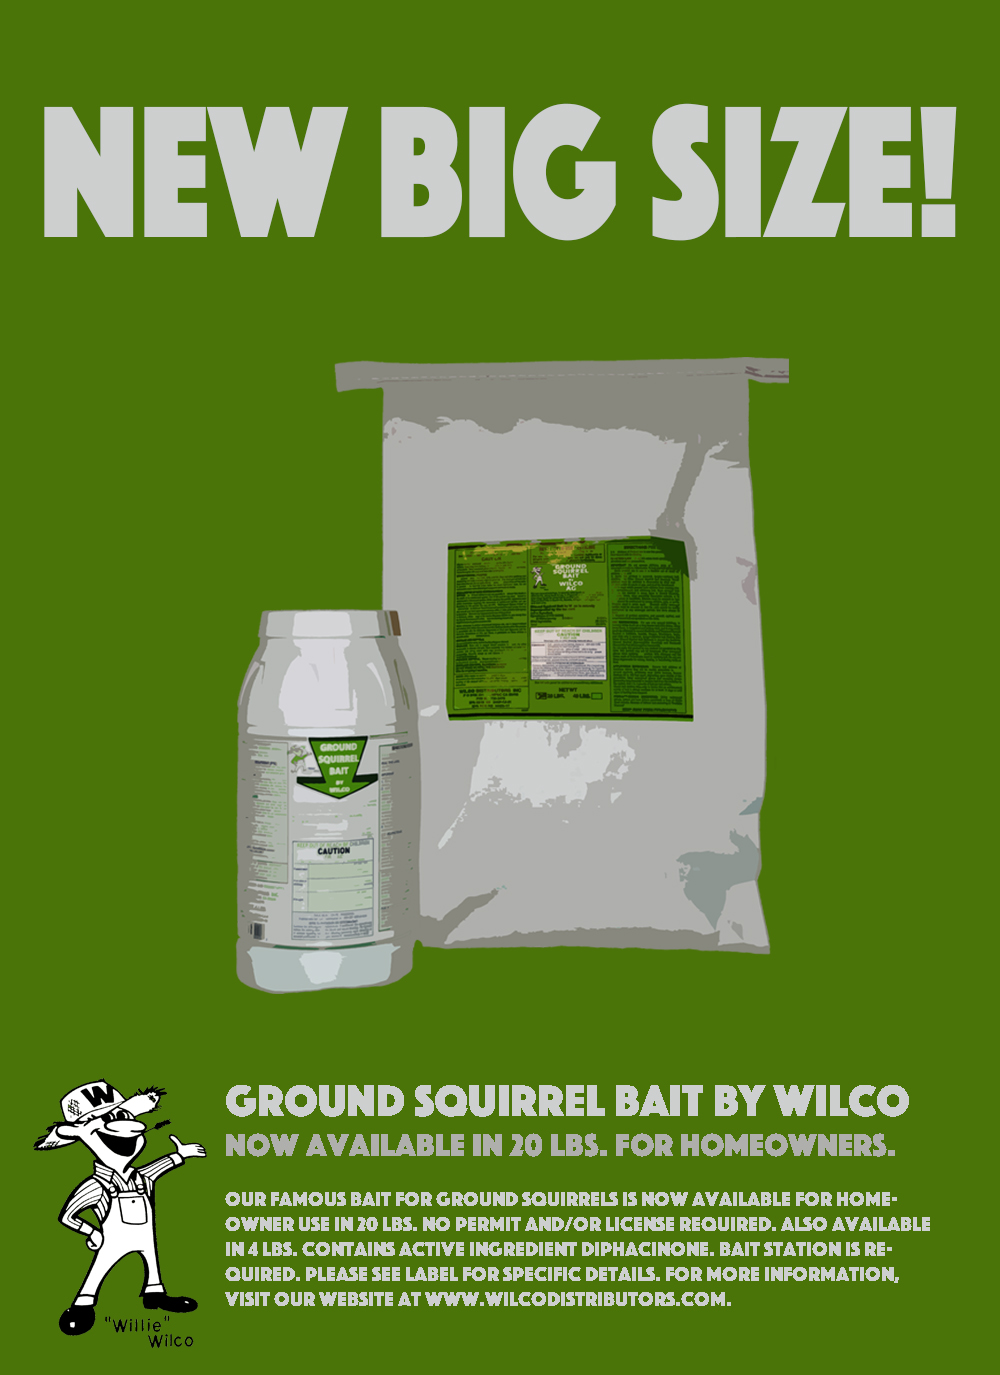 New Big Size for Homeowners: Wilco Ground Squirrel Bait